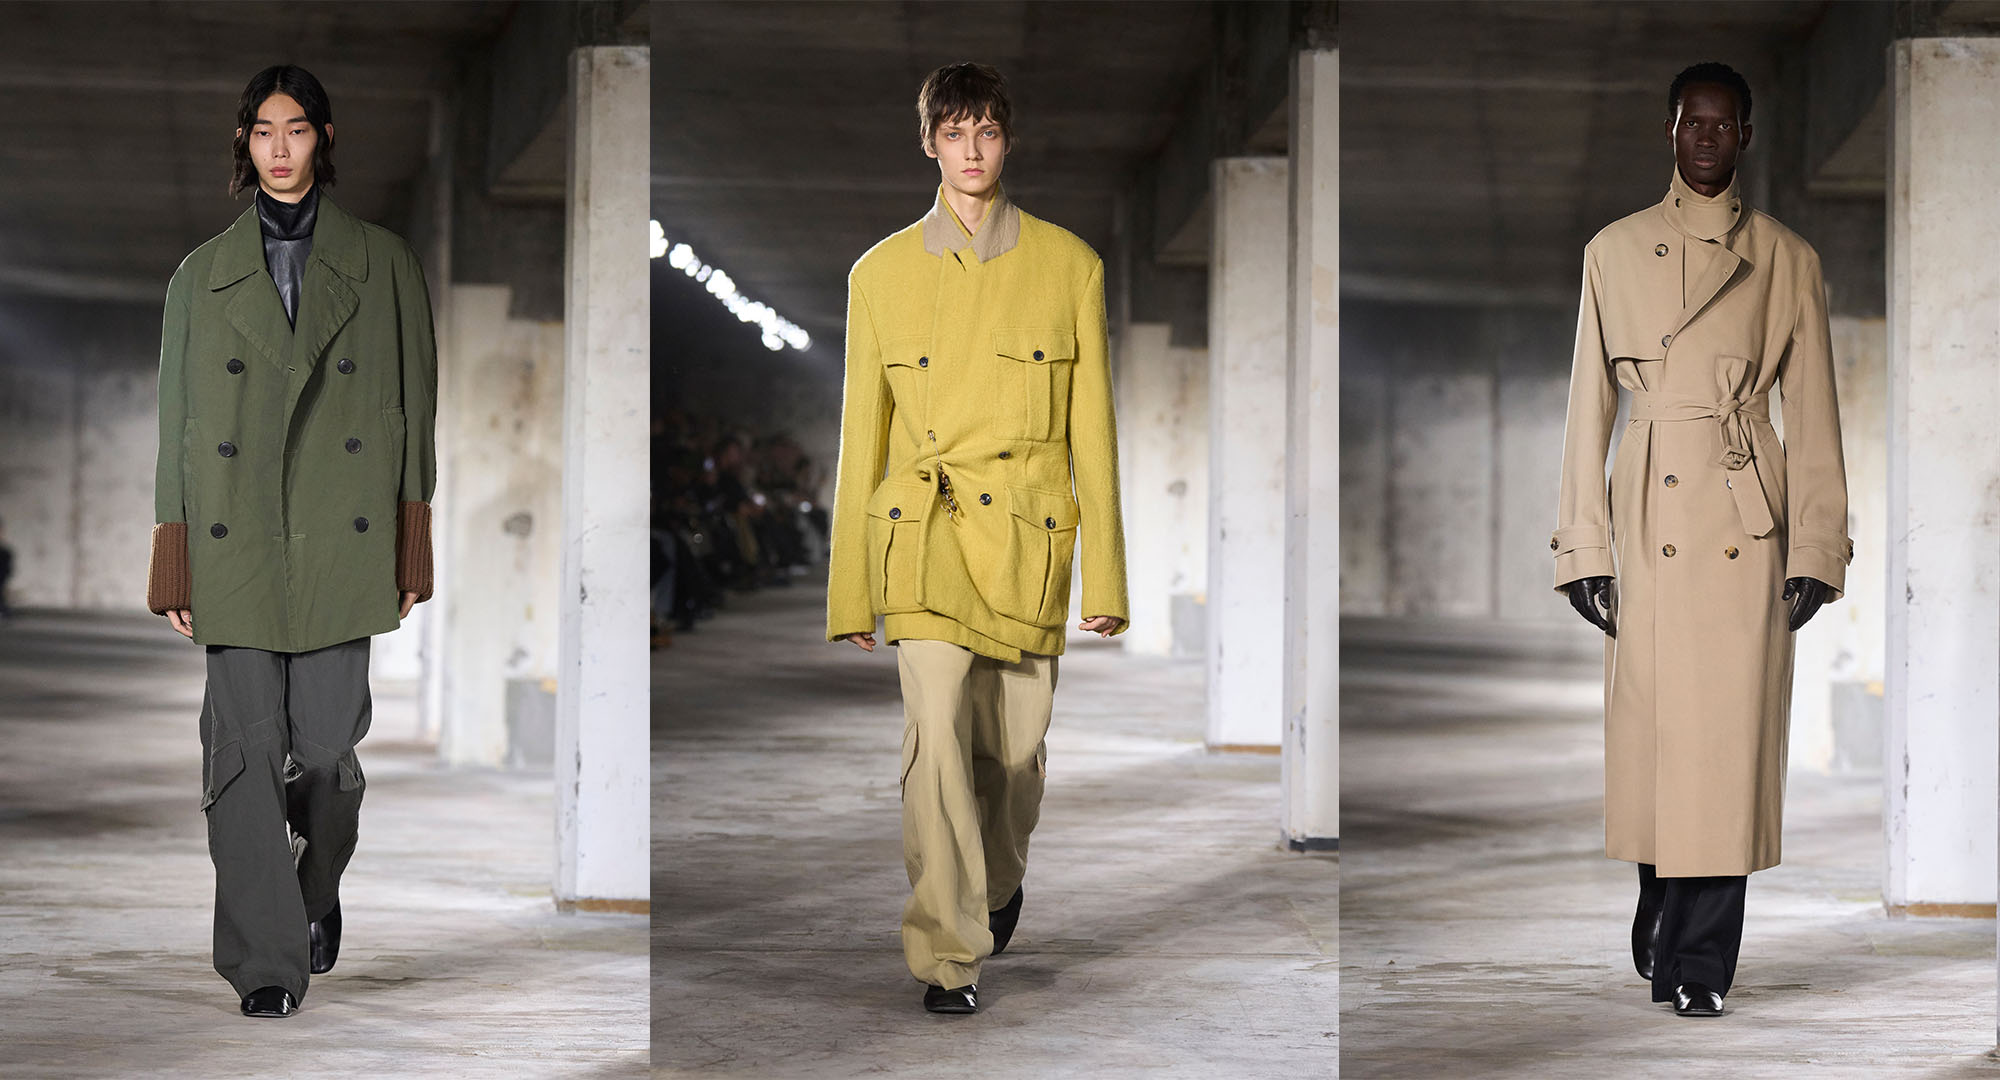 Paris Fashion Week Men’s Was a Cluster of Contradictions - Mission